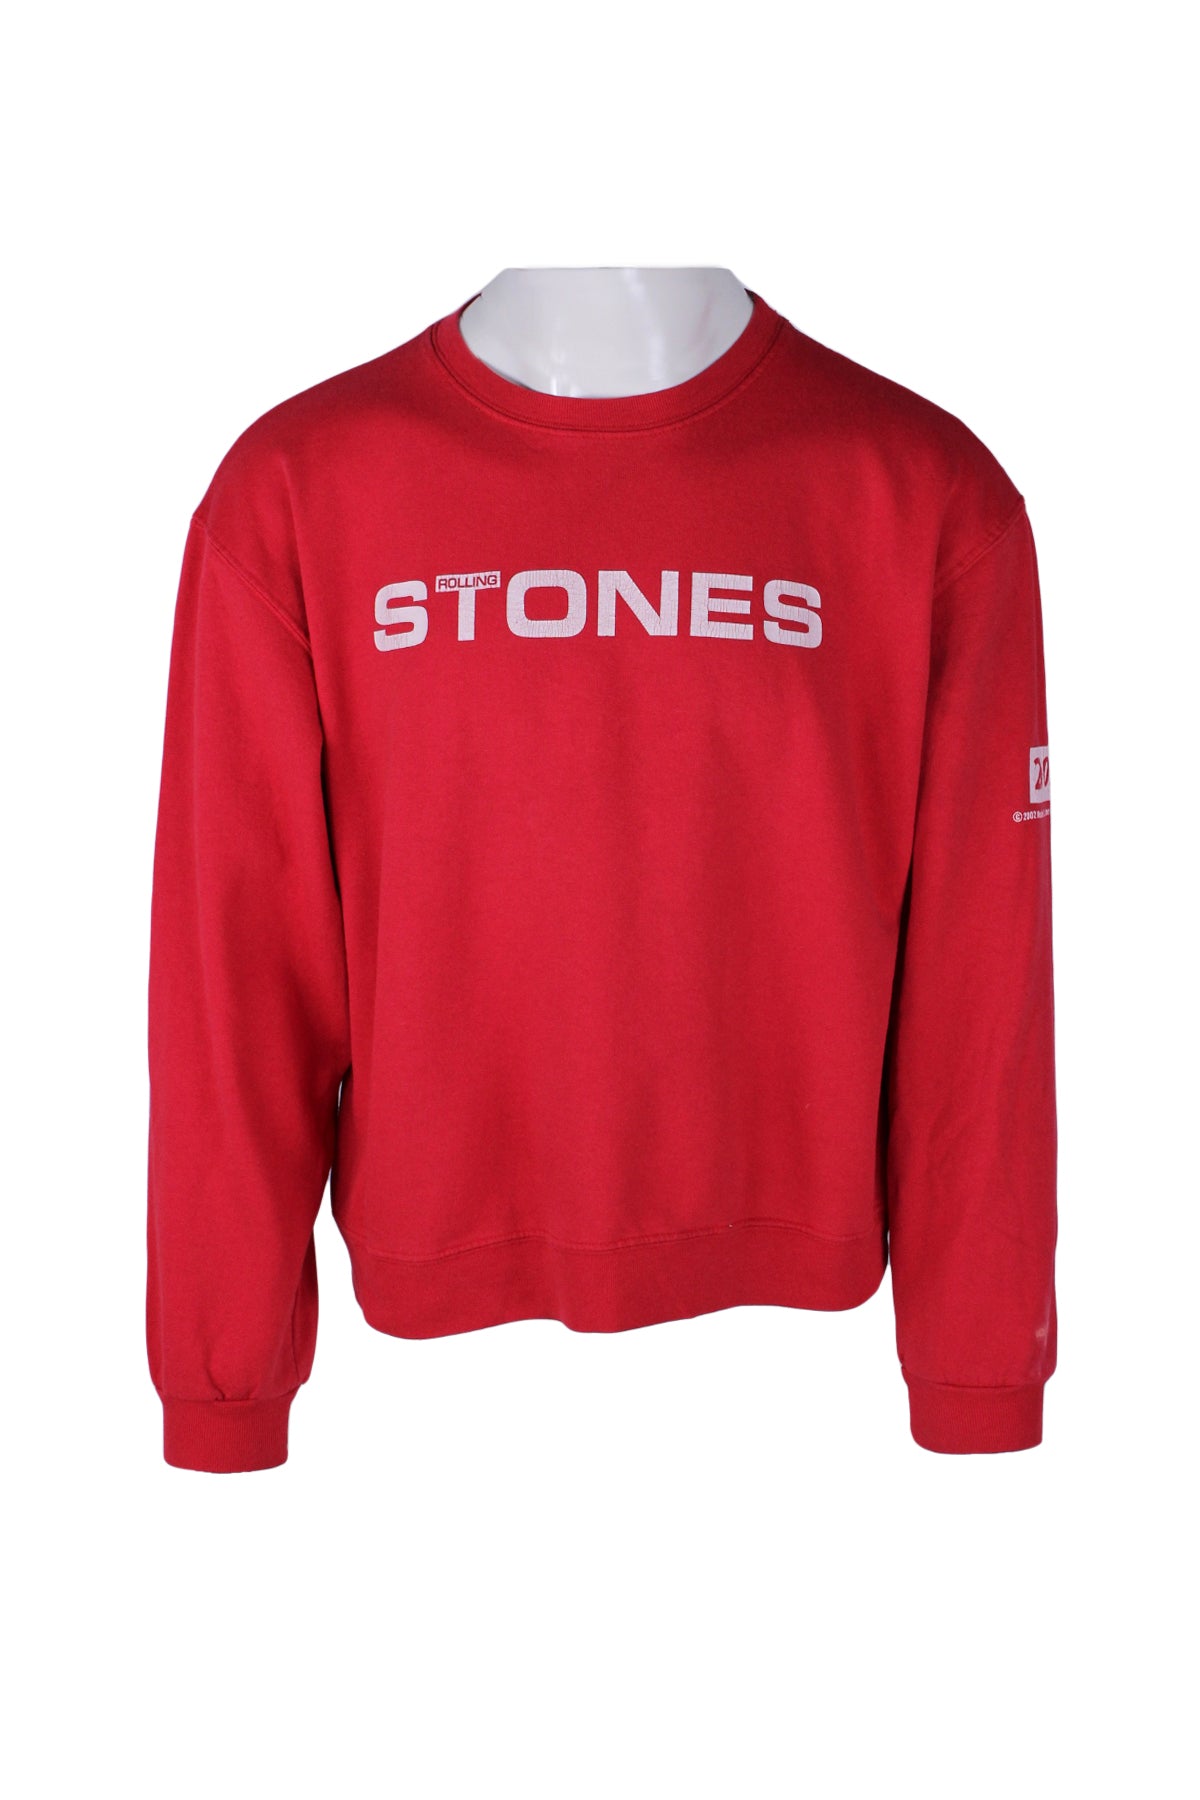 front angle of vintage rolling stones red crew neck sweatshirt. branding across chest with all caps text 'stones' and the word 'rolling' small within the 't', ribbed rounded collar/cuff/hem, and pull-over fit. 